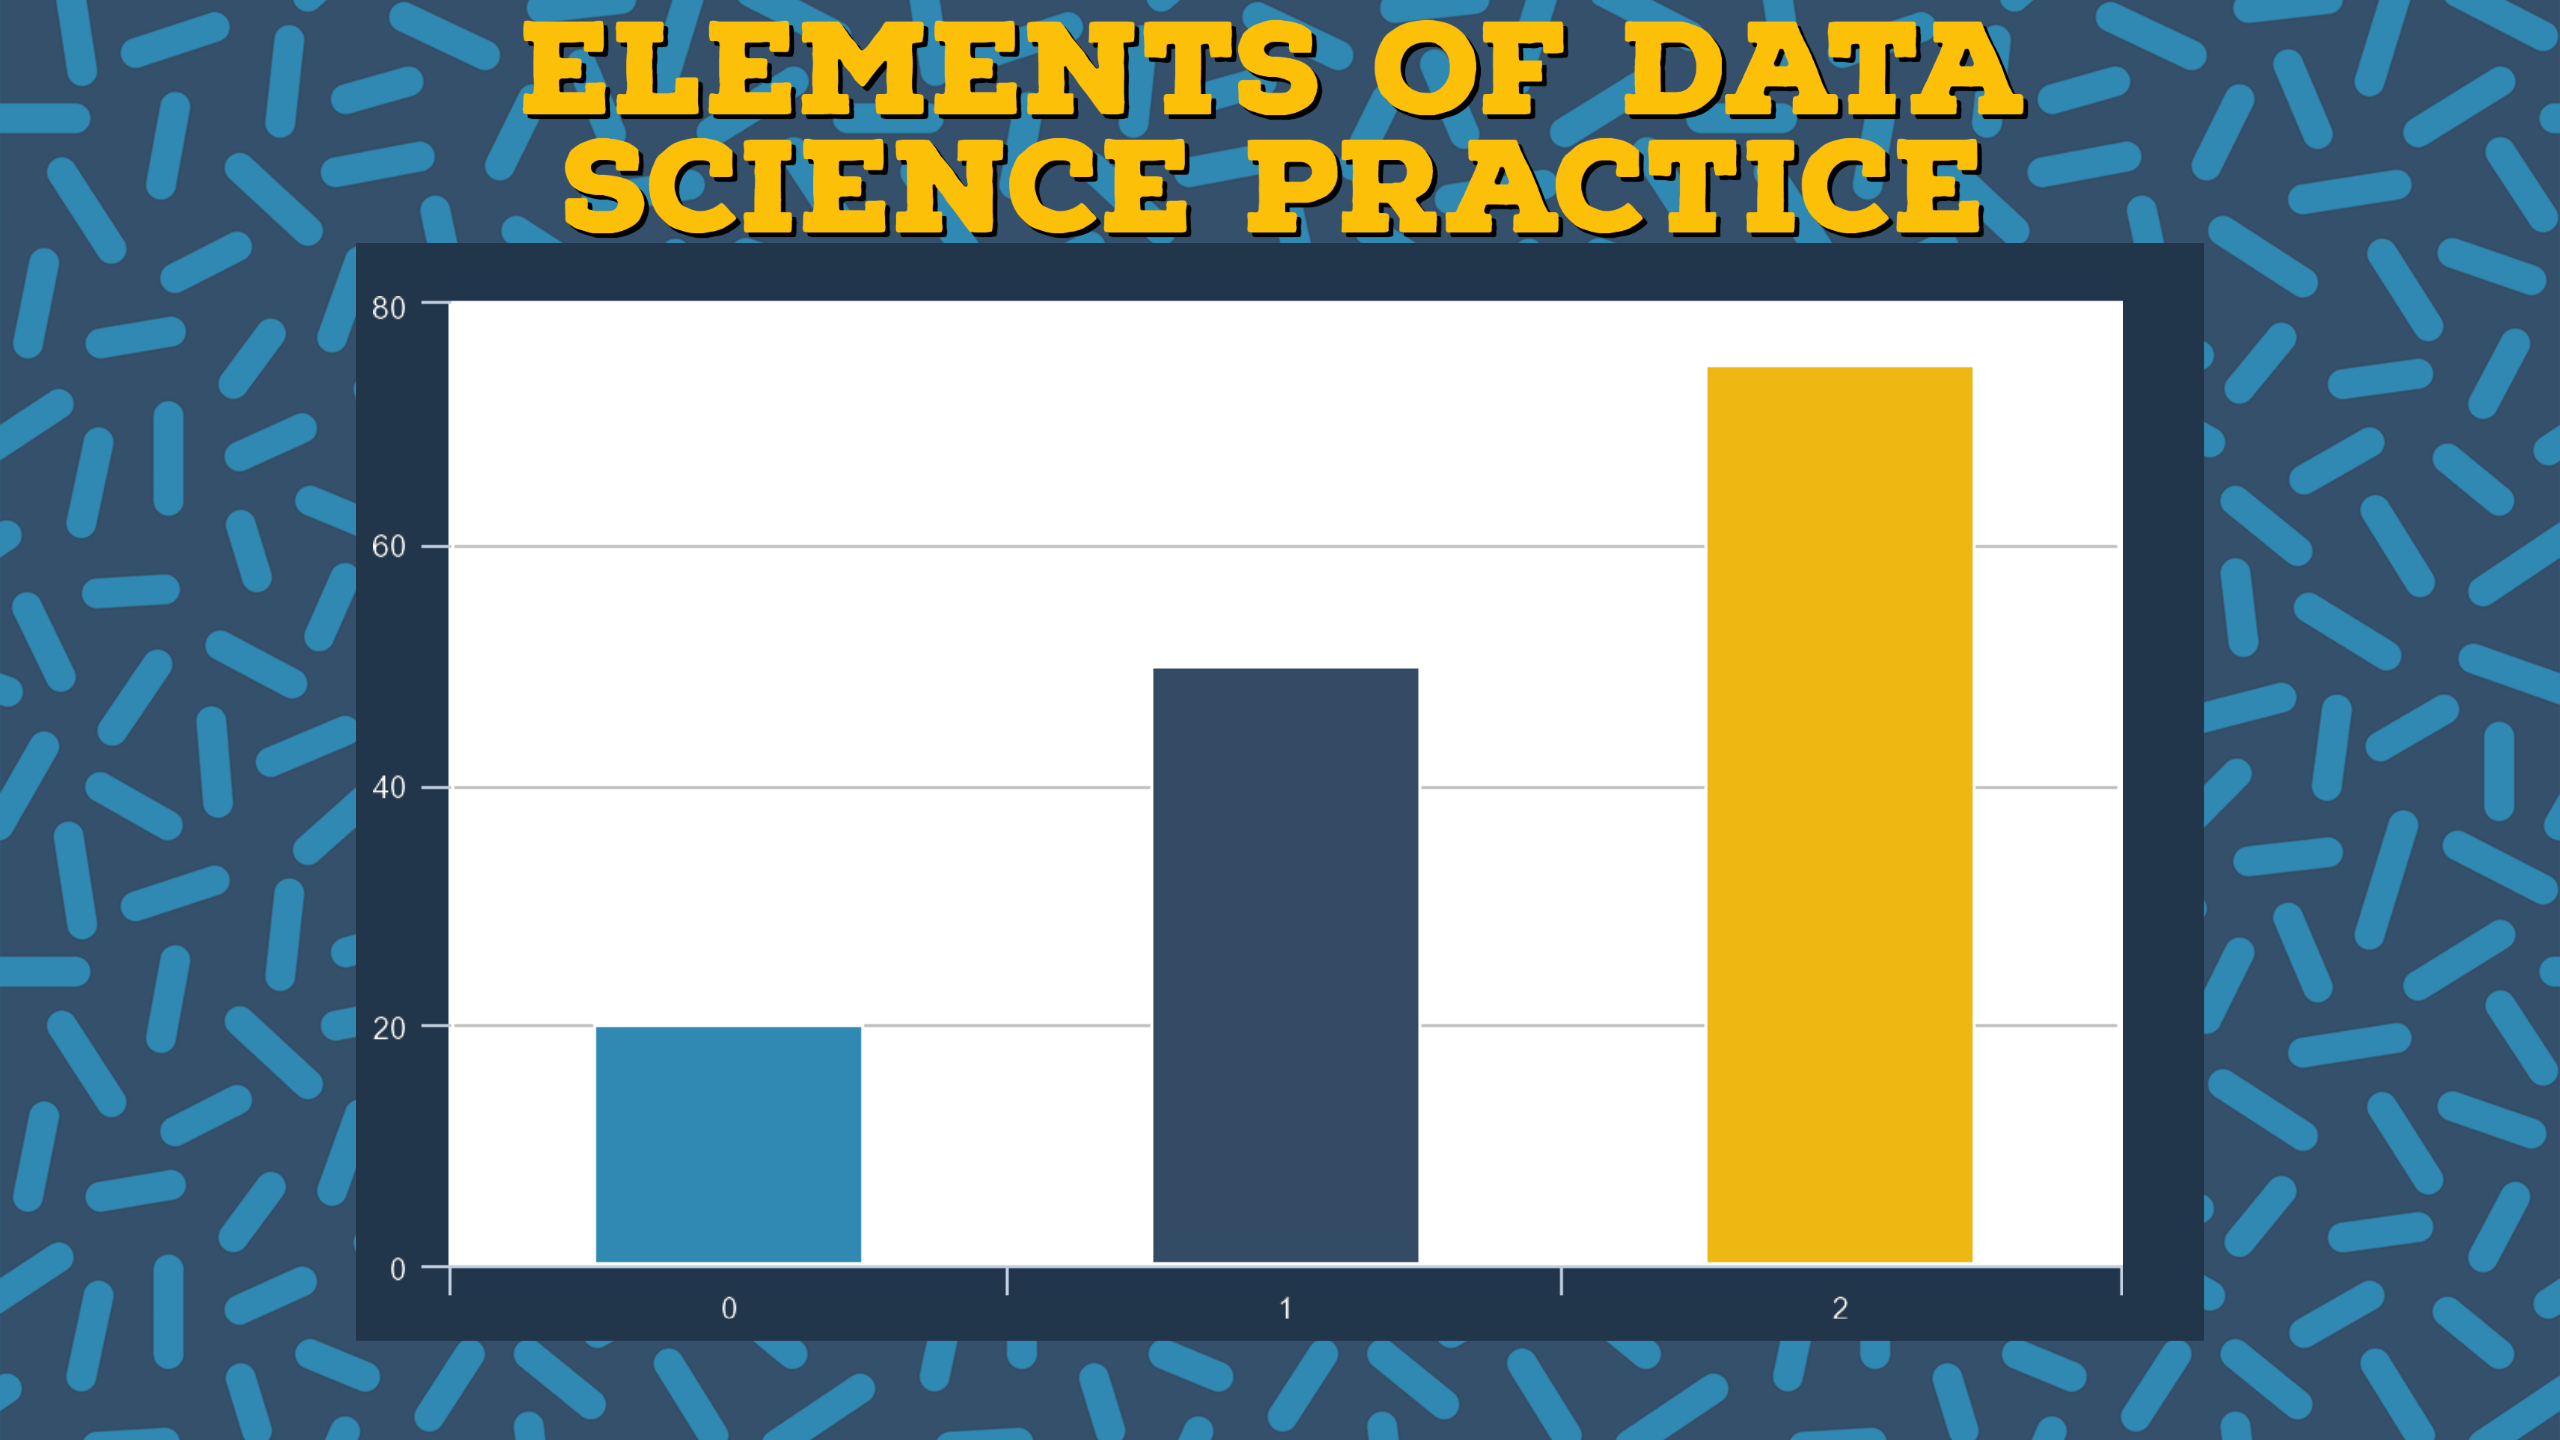 Elements of a Data Science practice